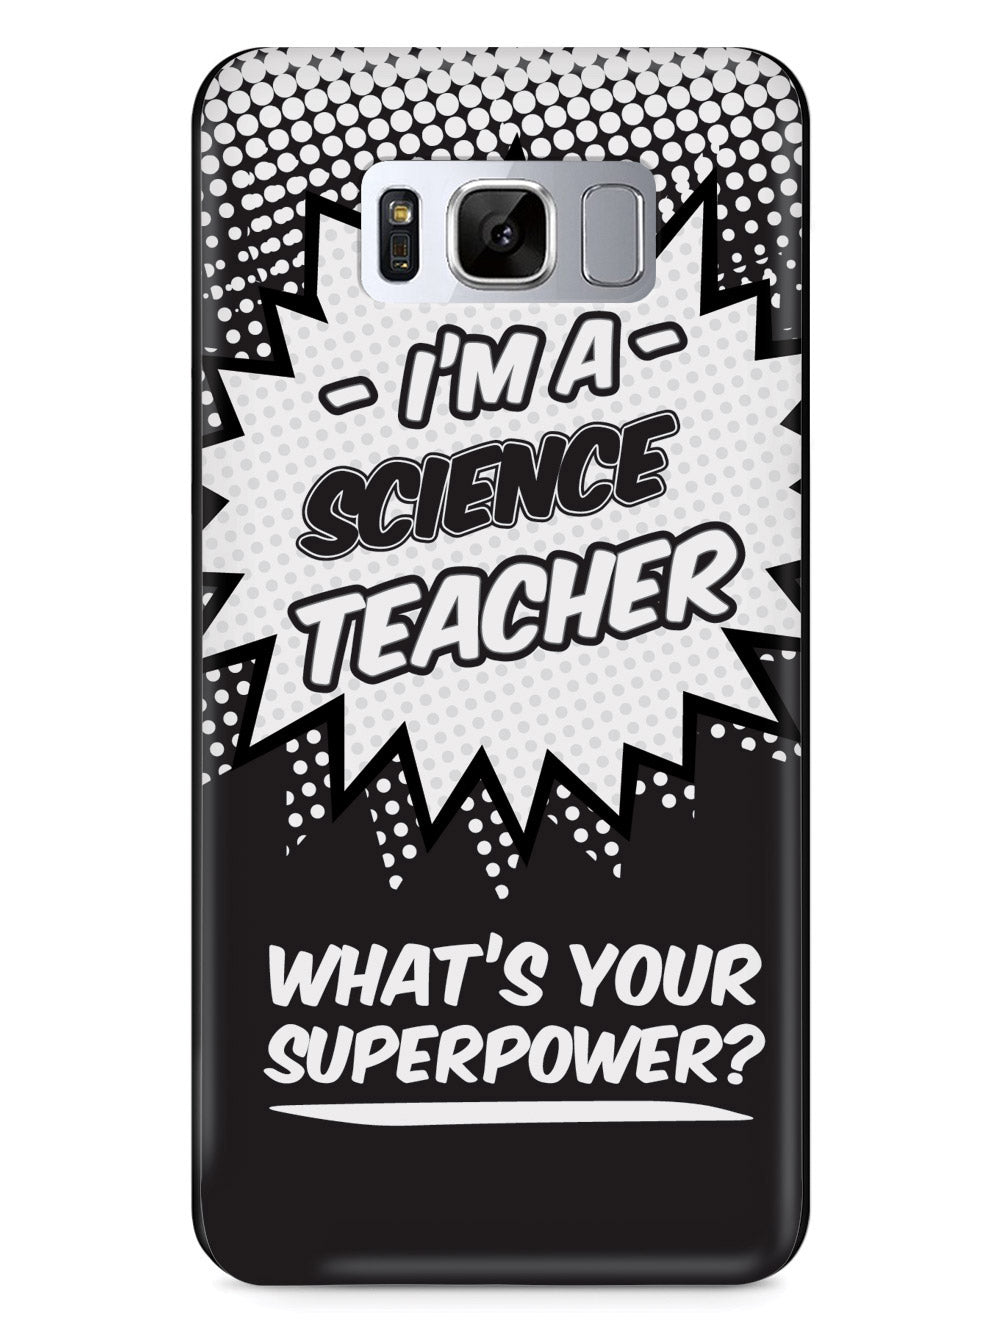 Science Teacher - What's Your Superpower? Case